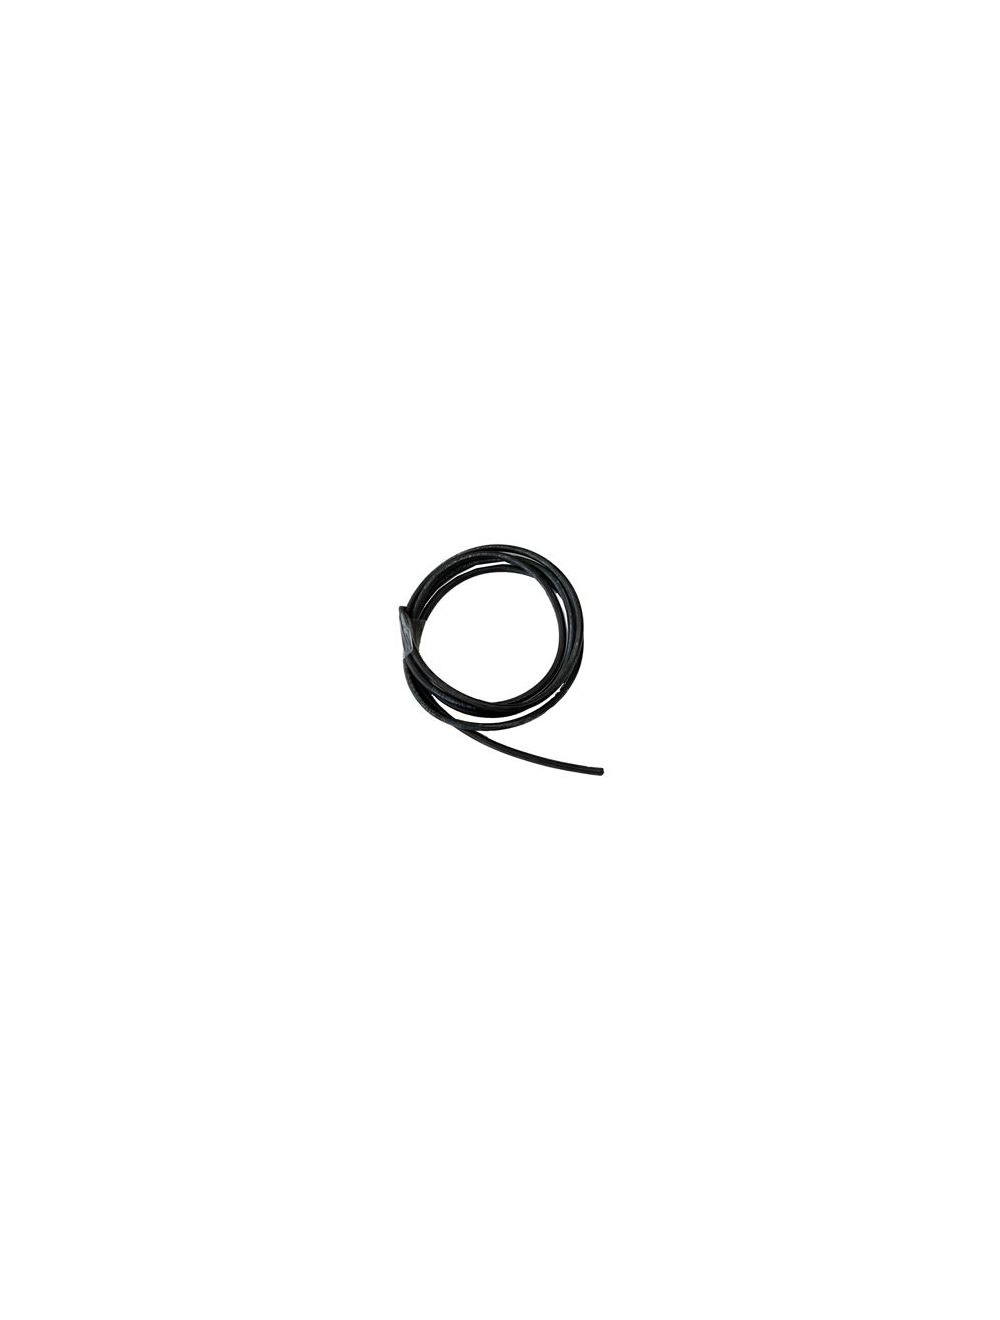 Overlander Soft Black Silicone Wire - 1.5mm/16AWG (1m) 1212